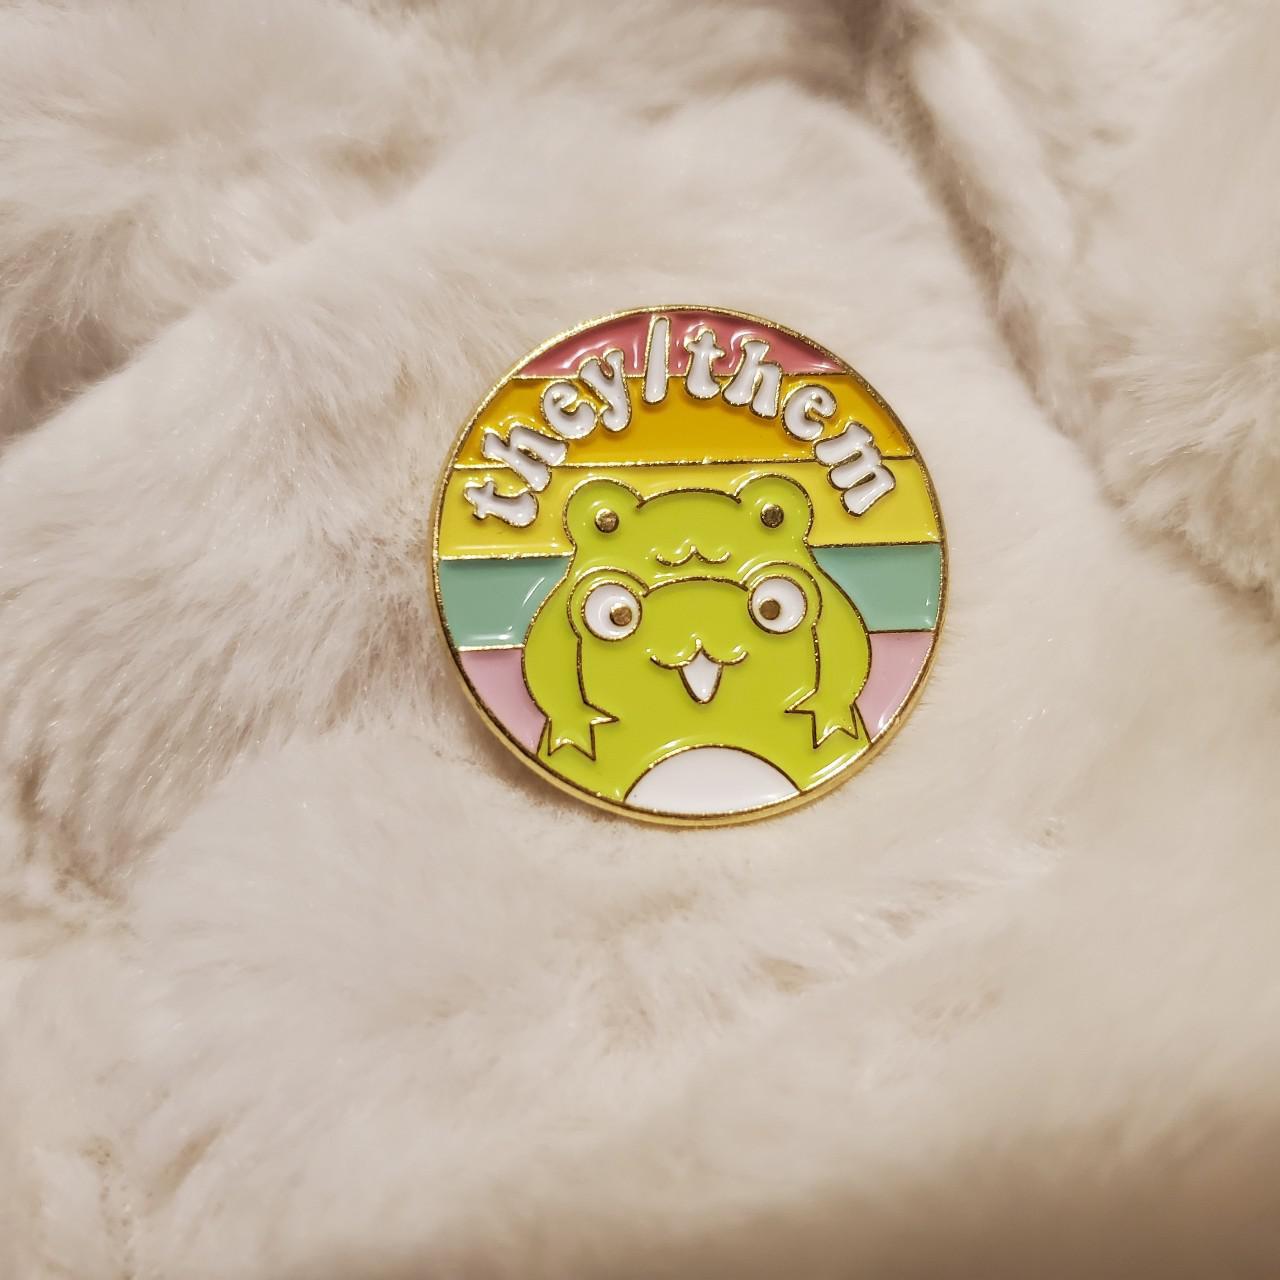 Product Image 1 - They/them frog pronoun pin!

#they #them